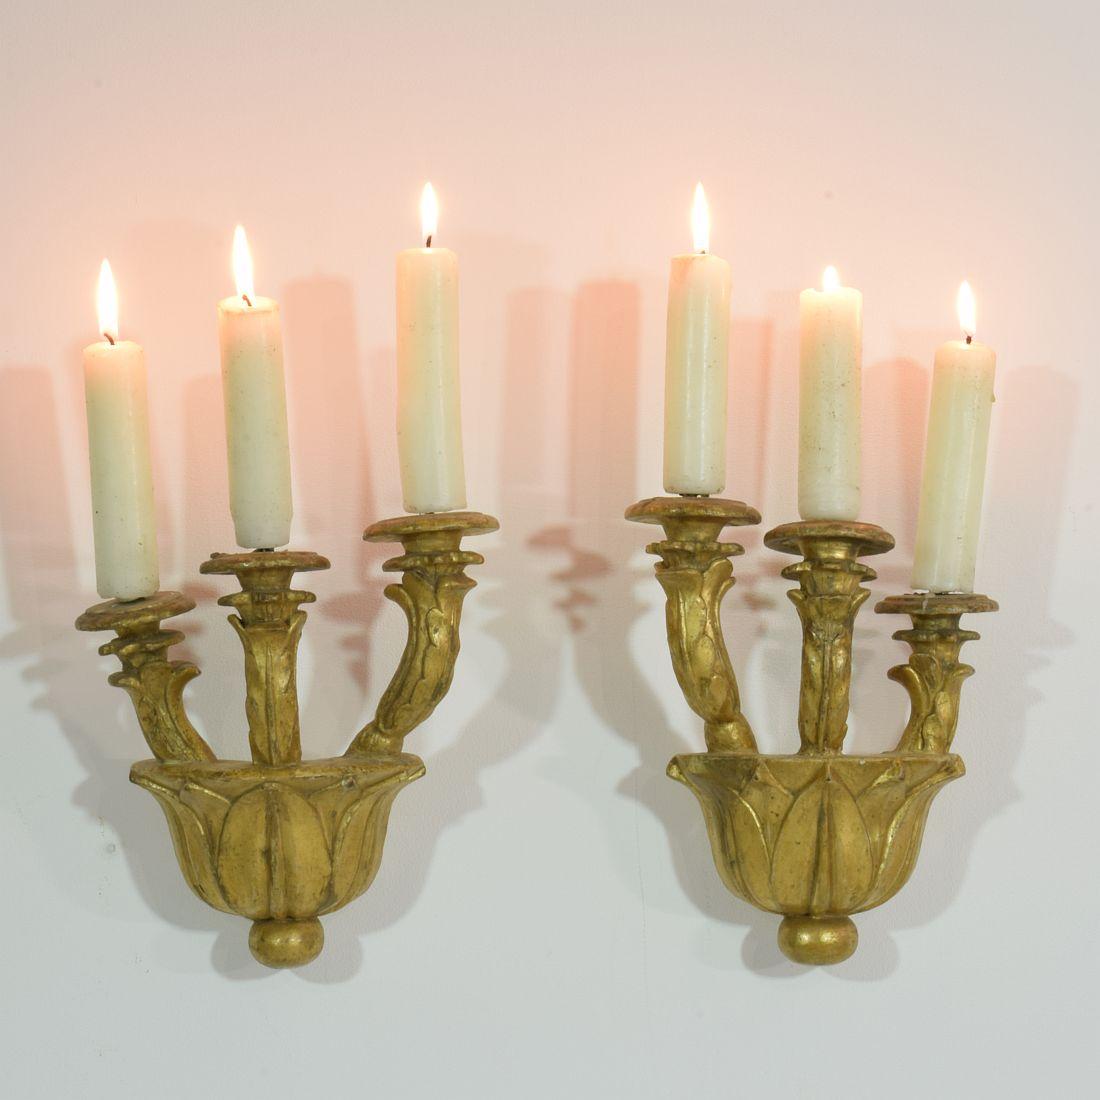 Beautiful pair of Baroque giltwood candleholders, easy to mount at your wall due to attachment of later date.
Unique and original period pieces, Italy, circa 1750.
Weathered, small losses and old repairs
Measures: H 27 cm (10.75 in), W 20 cm (8